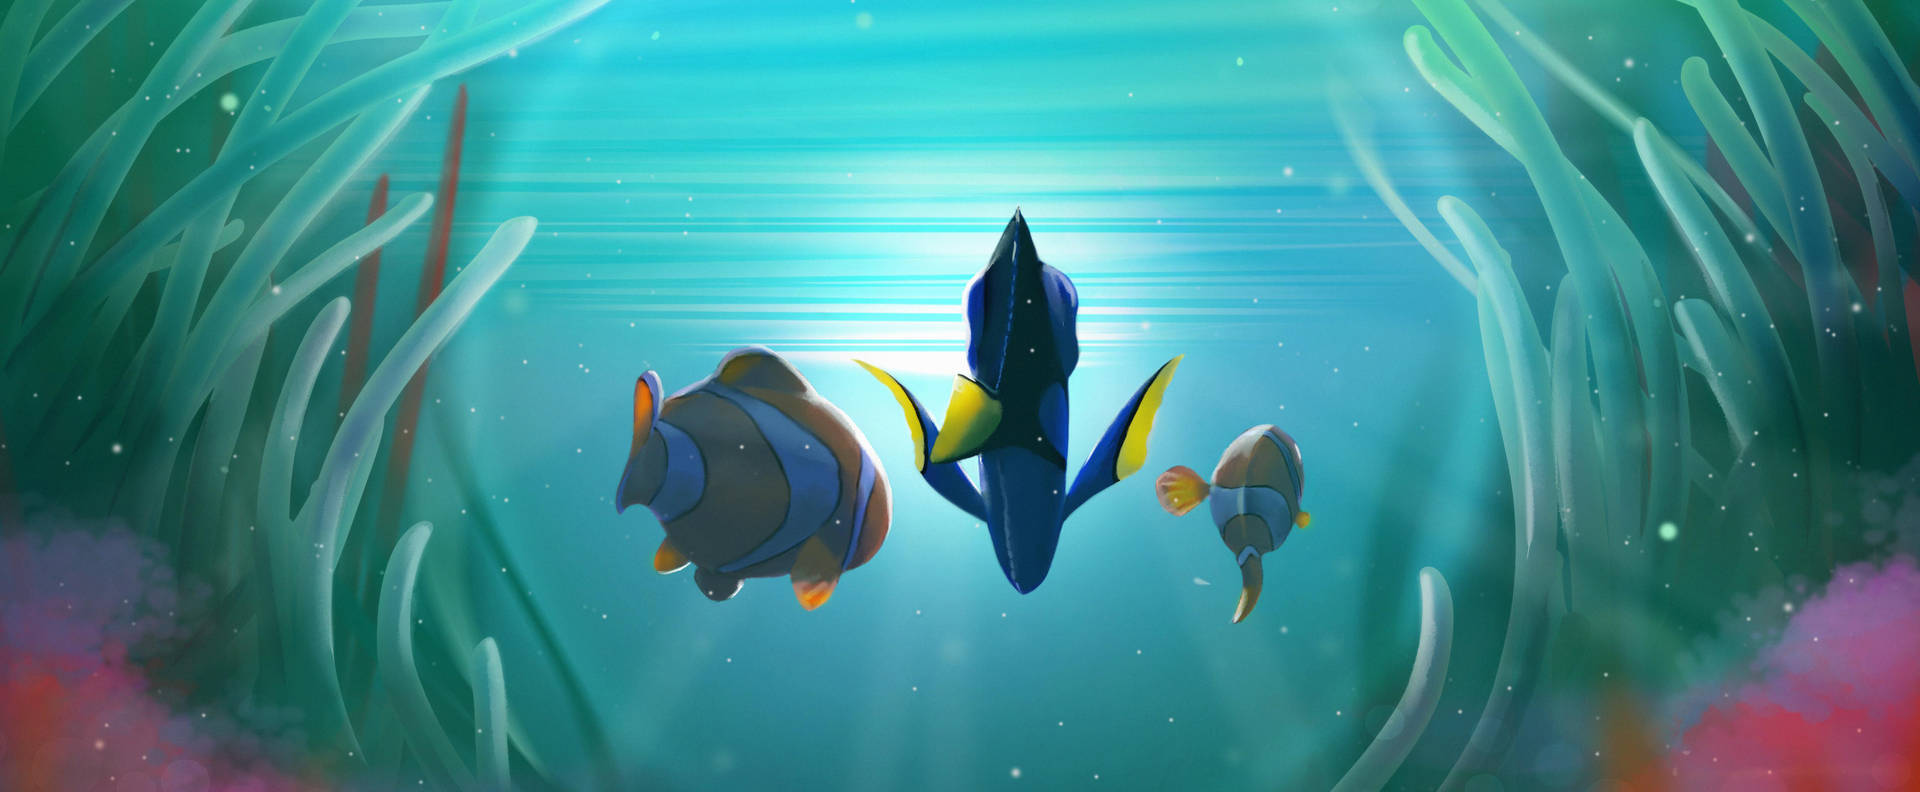 Finding Dory Graphic Art Background